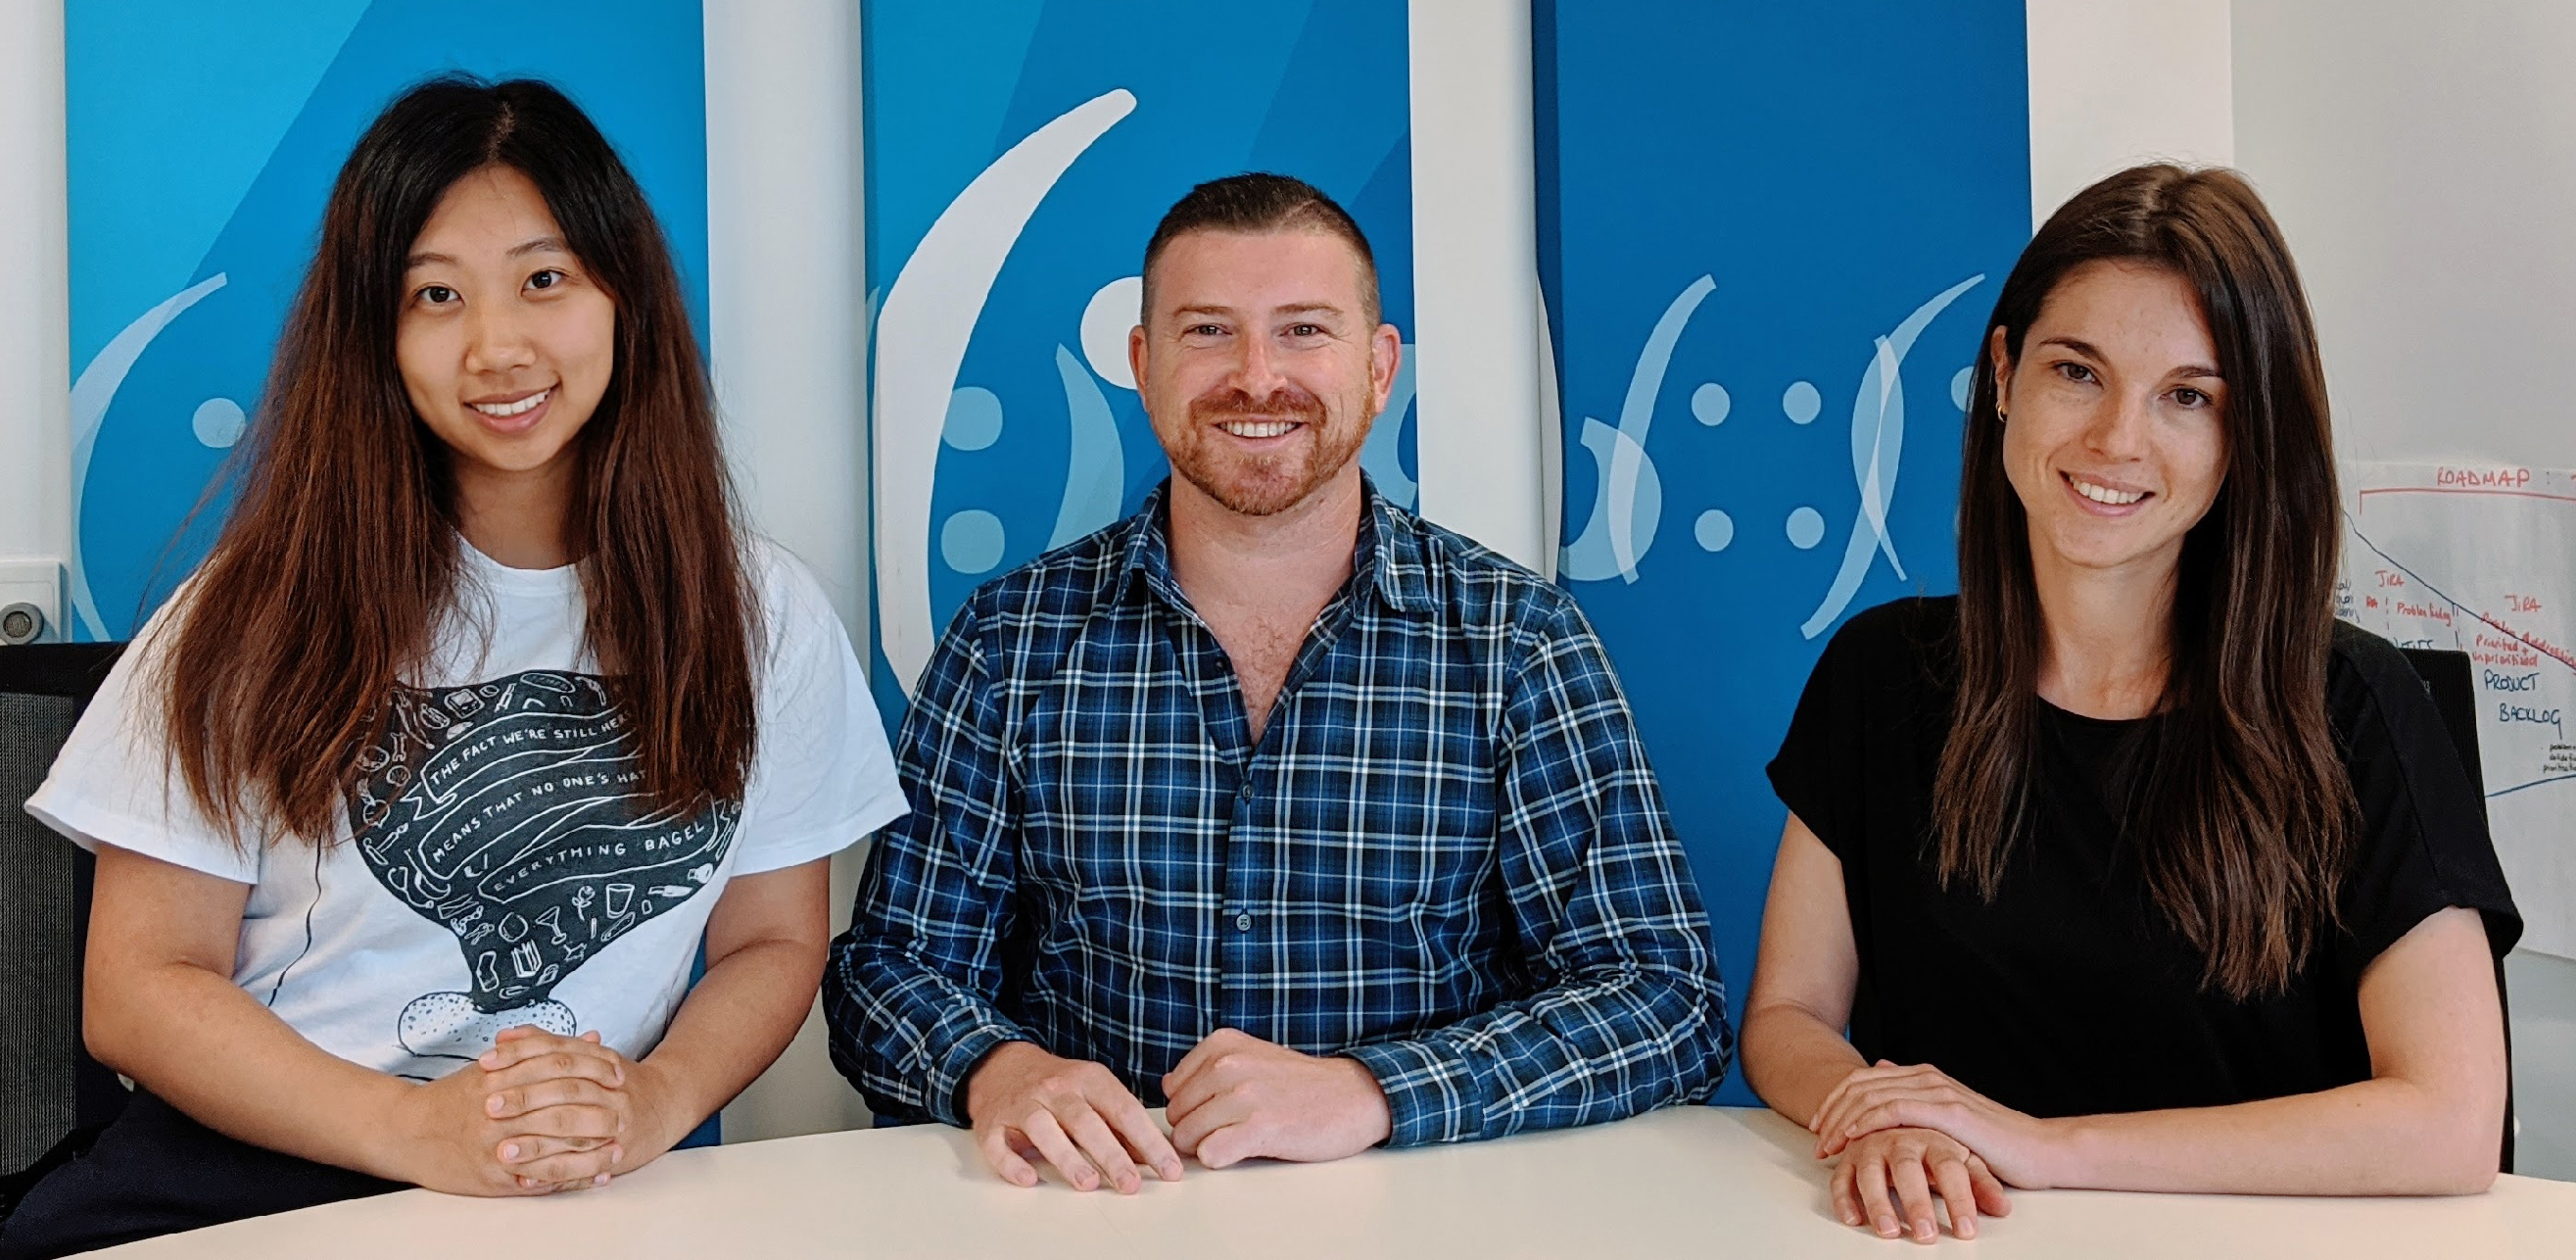 ux team - Lily, Dale and Raquel